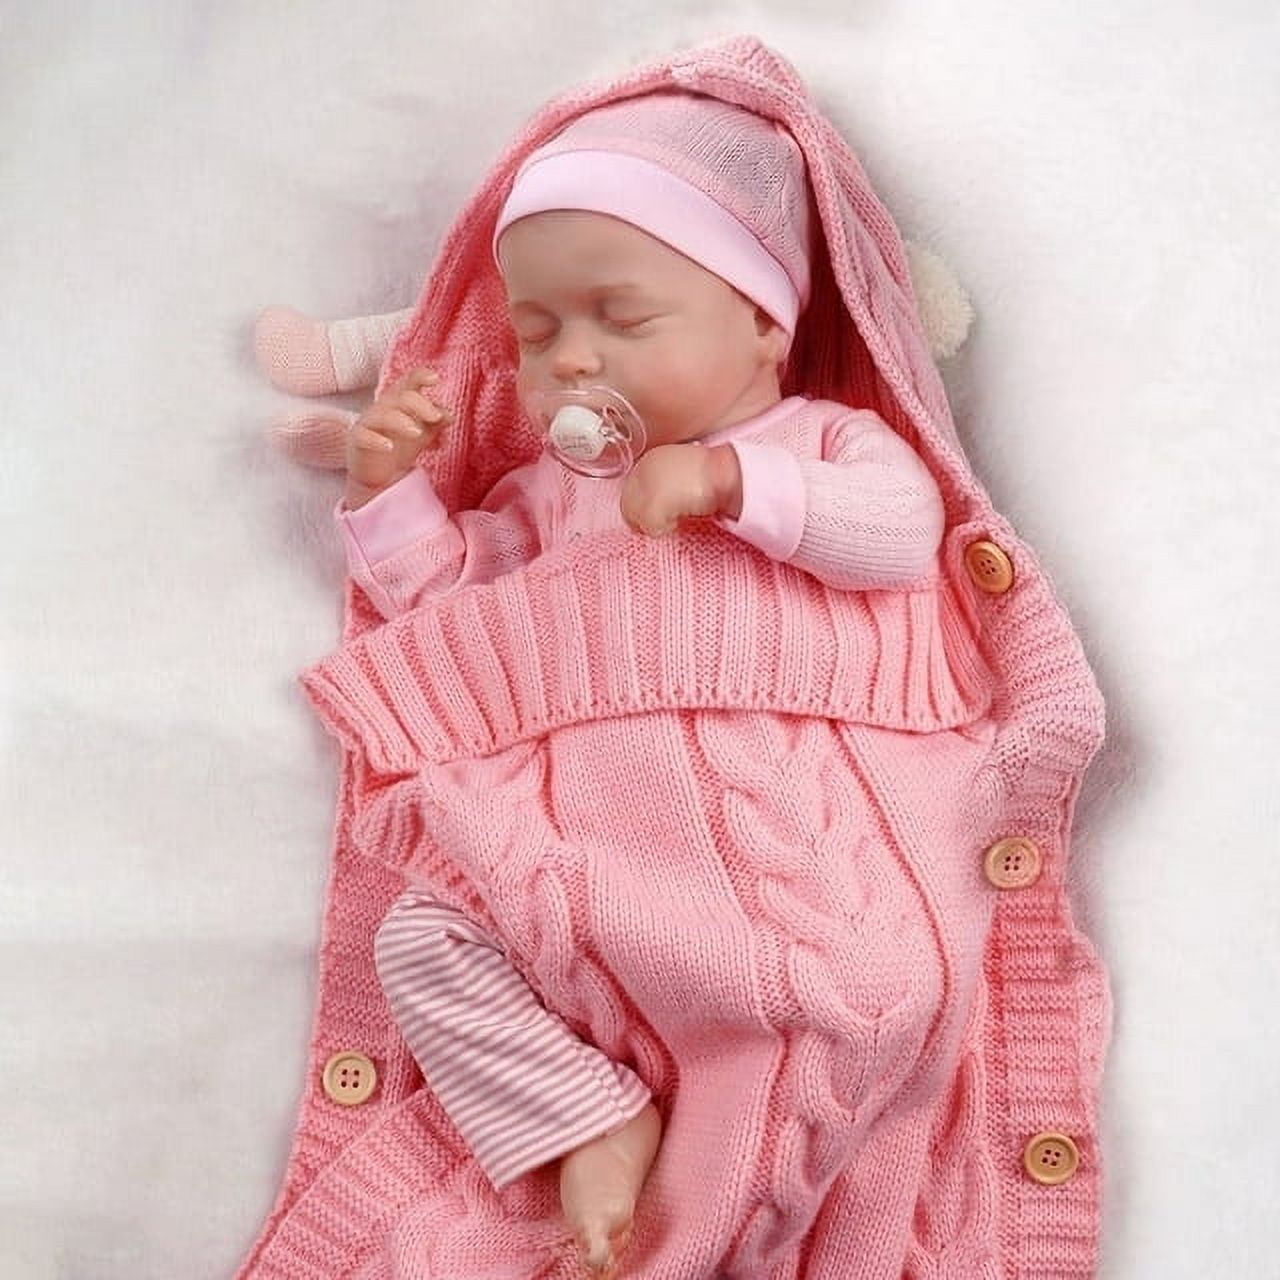 8 Pcs Reborn Baby Doll Accessories with Bassinet for 17-22 Inch